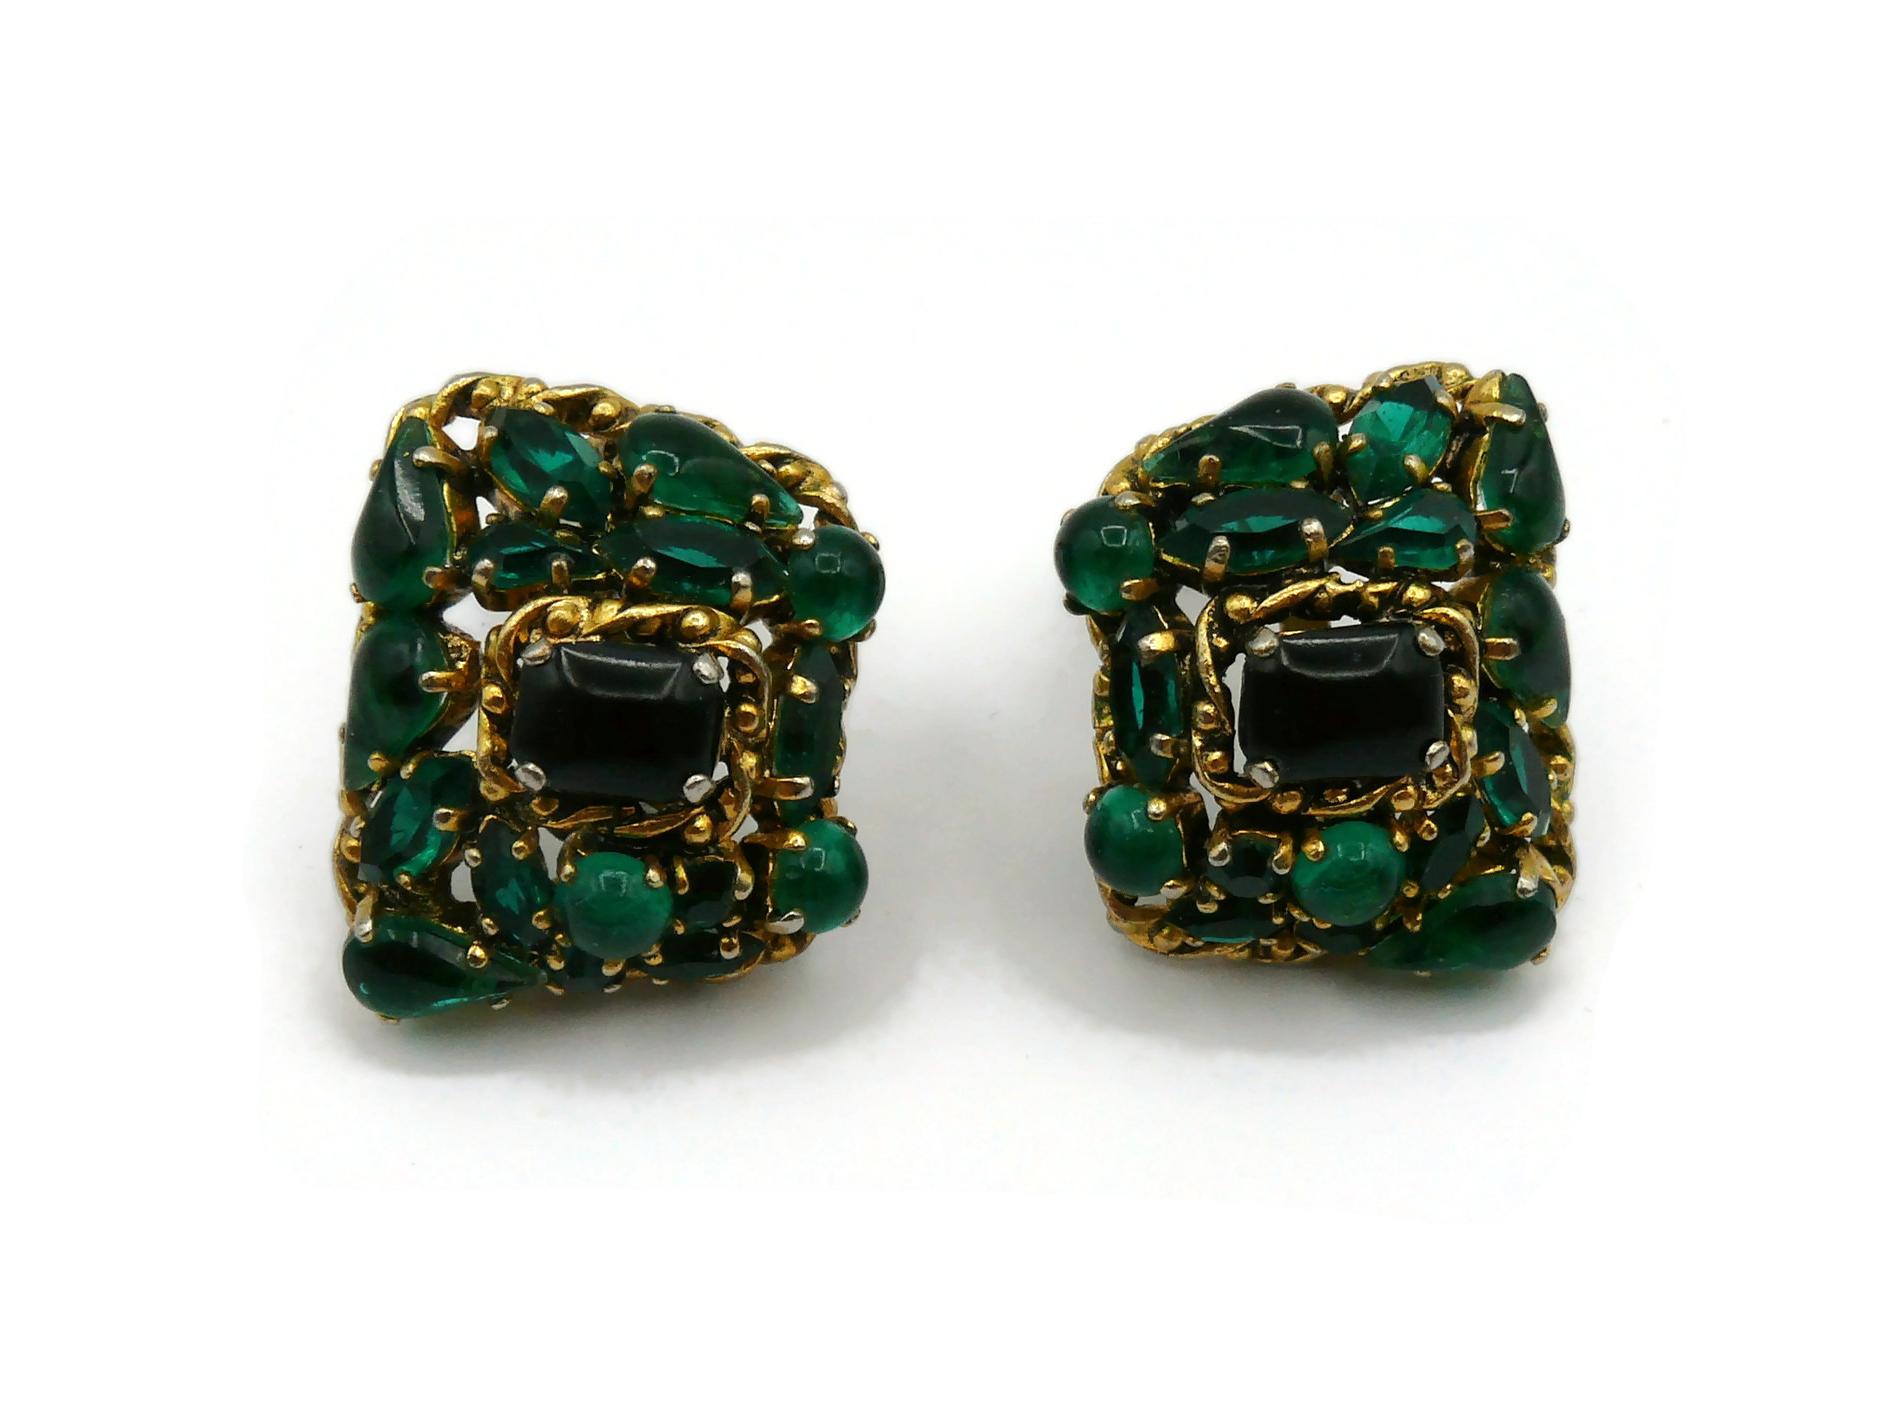 CHRISTIAN DIOR Vintage Jewelled Clip-On Earrings, 1963 For Sale 4